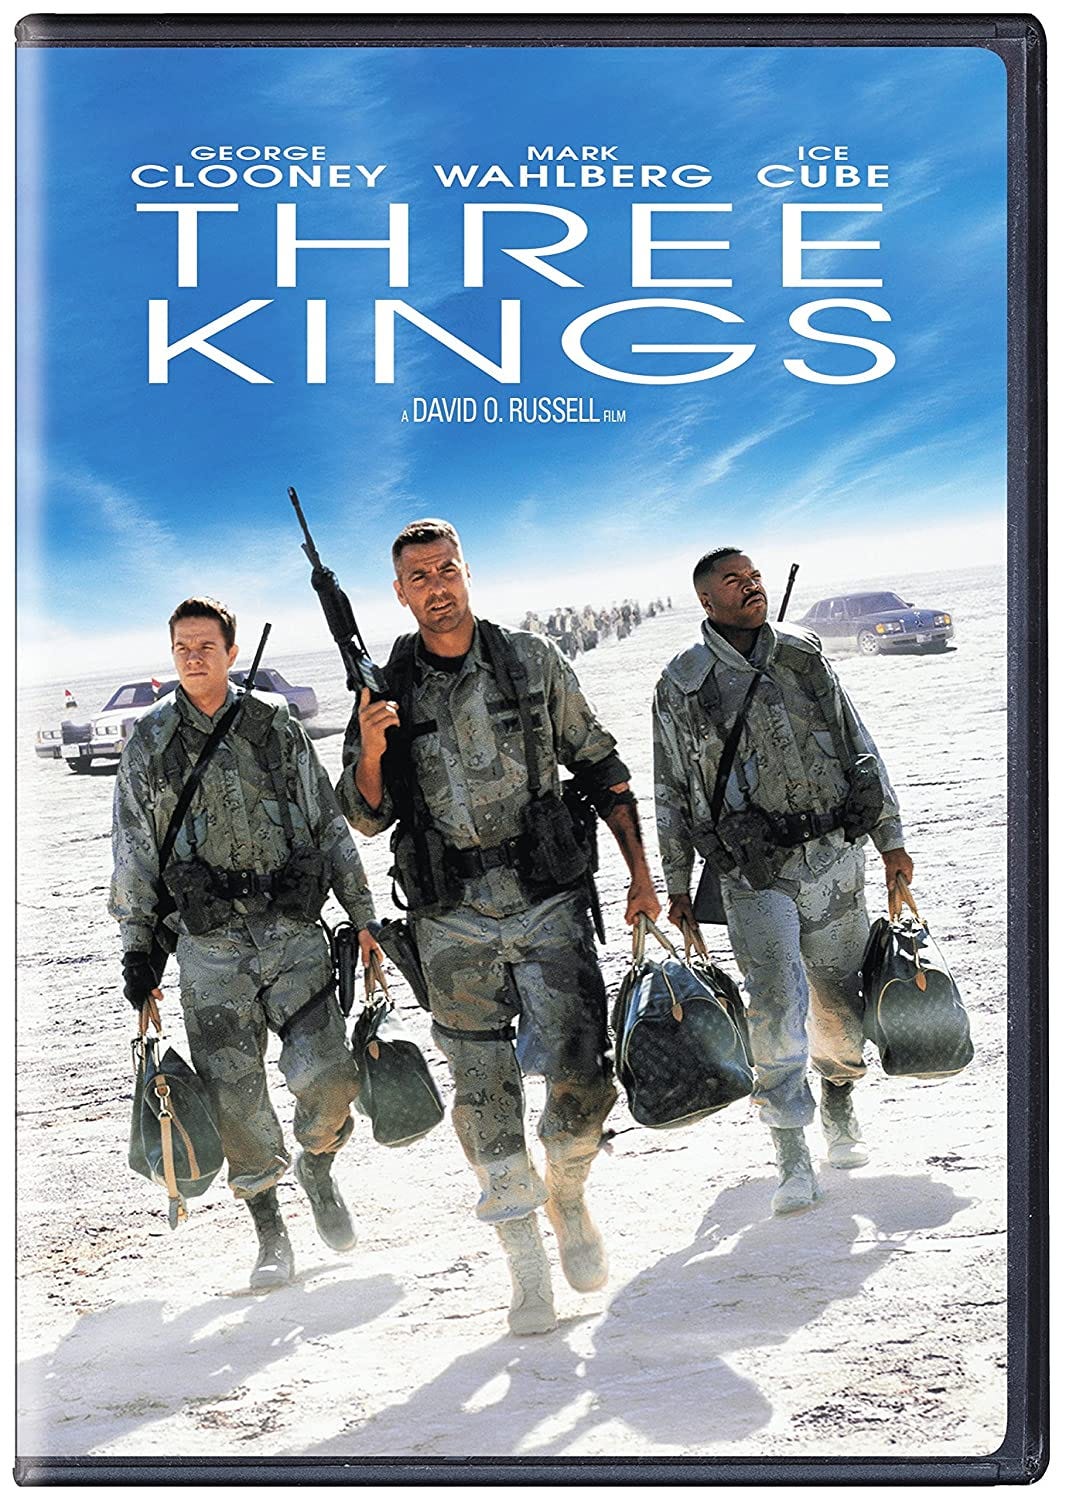 Amazon.com: Three Kings: Mark Wahlberg, Ice Cube, Spike Jonze, Nora Dunn,  Jamie Kennedy, Mykelti Williamson, Cliff Curtis, George Clooney, Saïd  Taghmaoui, David O. Russell, Charles Roven, Kelley Smith-Wait, Gregory  Goodman, Paul Junger